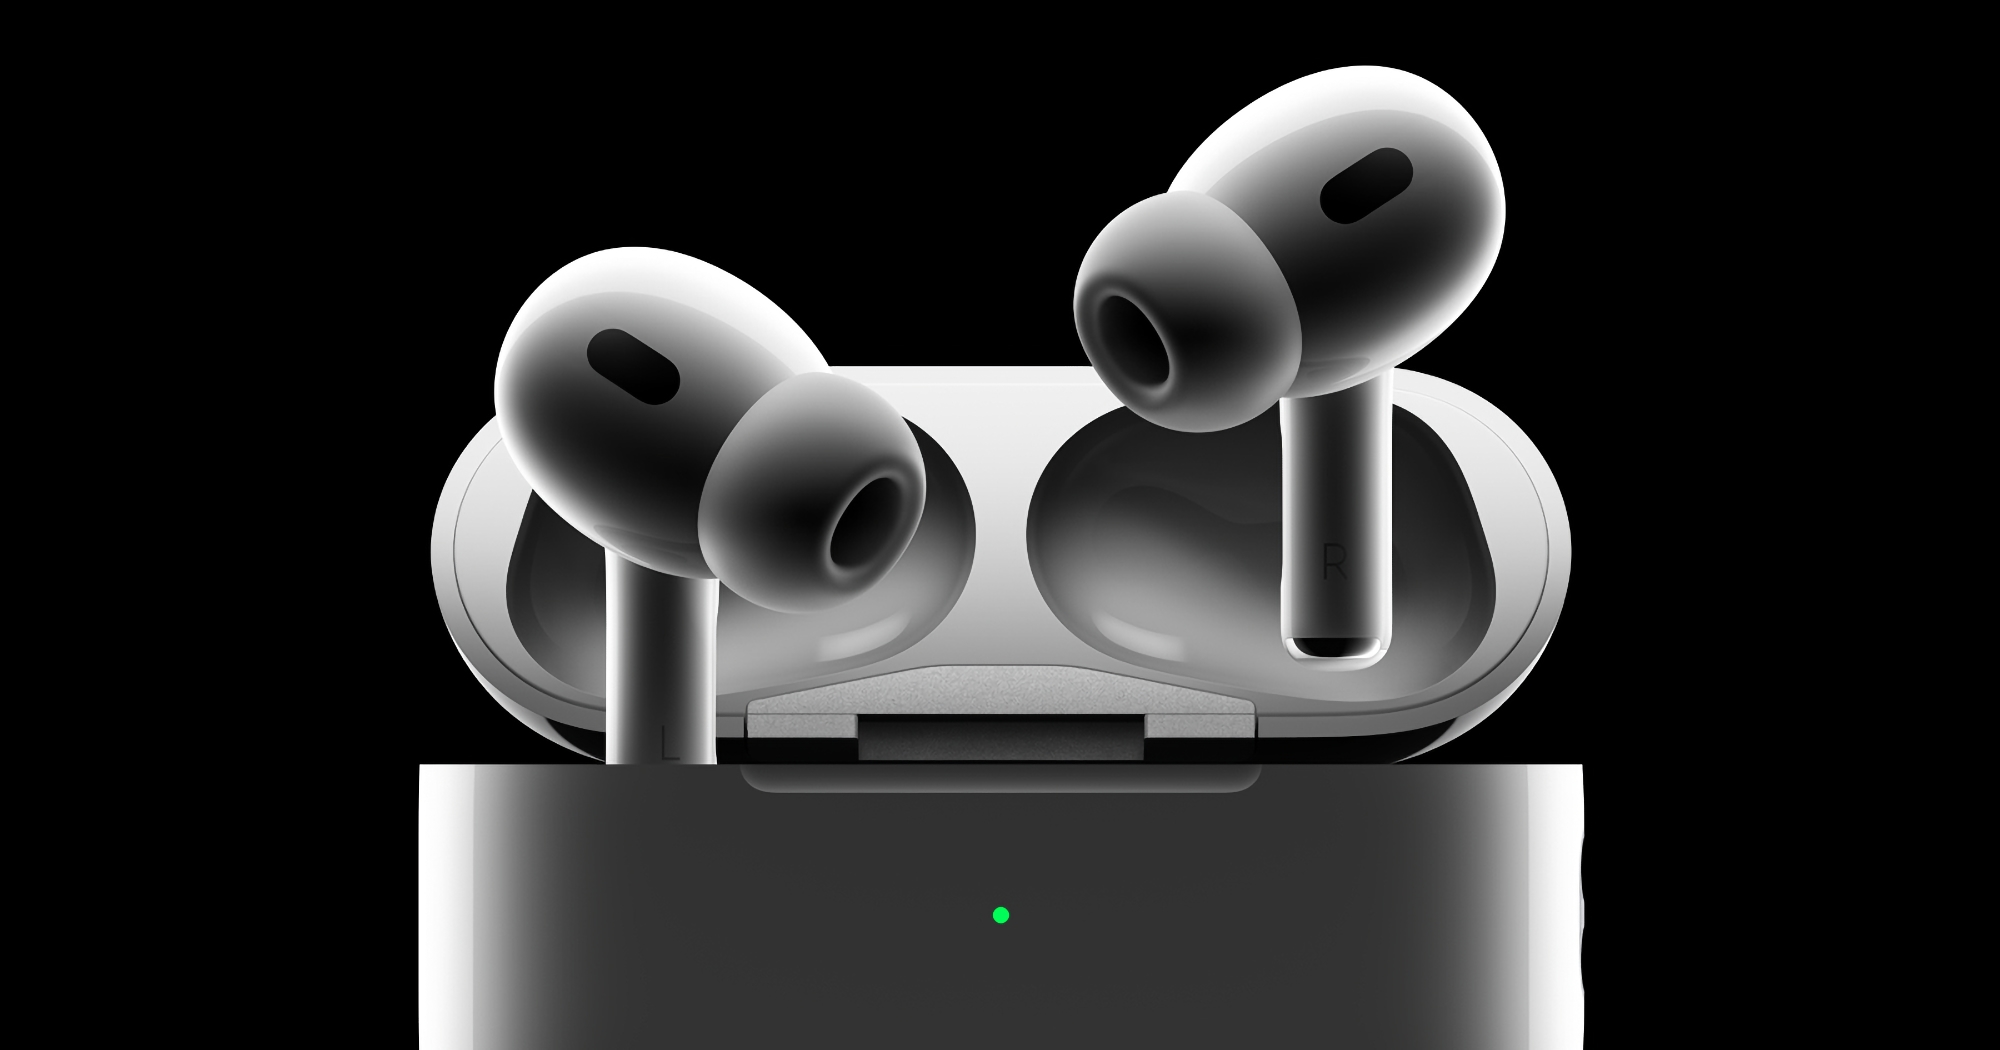 Apple has released a new beta software for AirPods Pro 2 with iOS 18 features